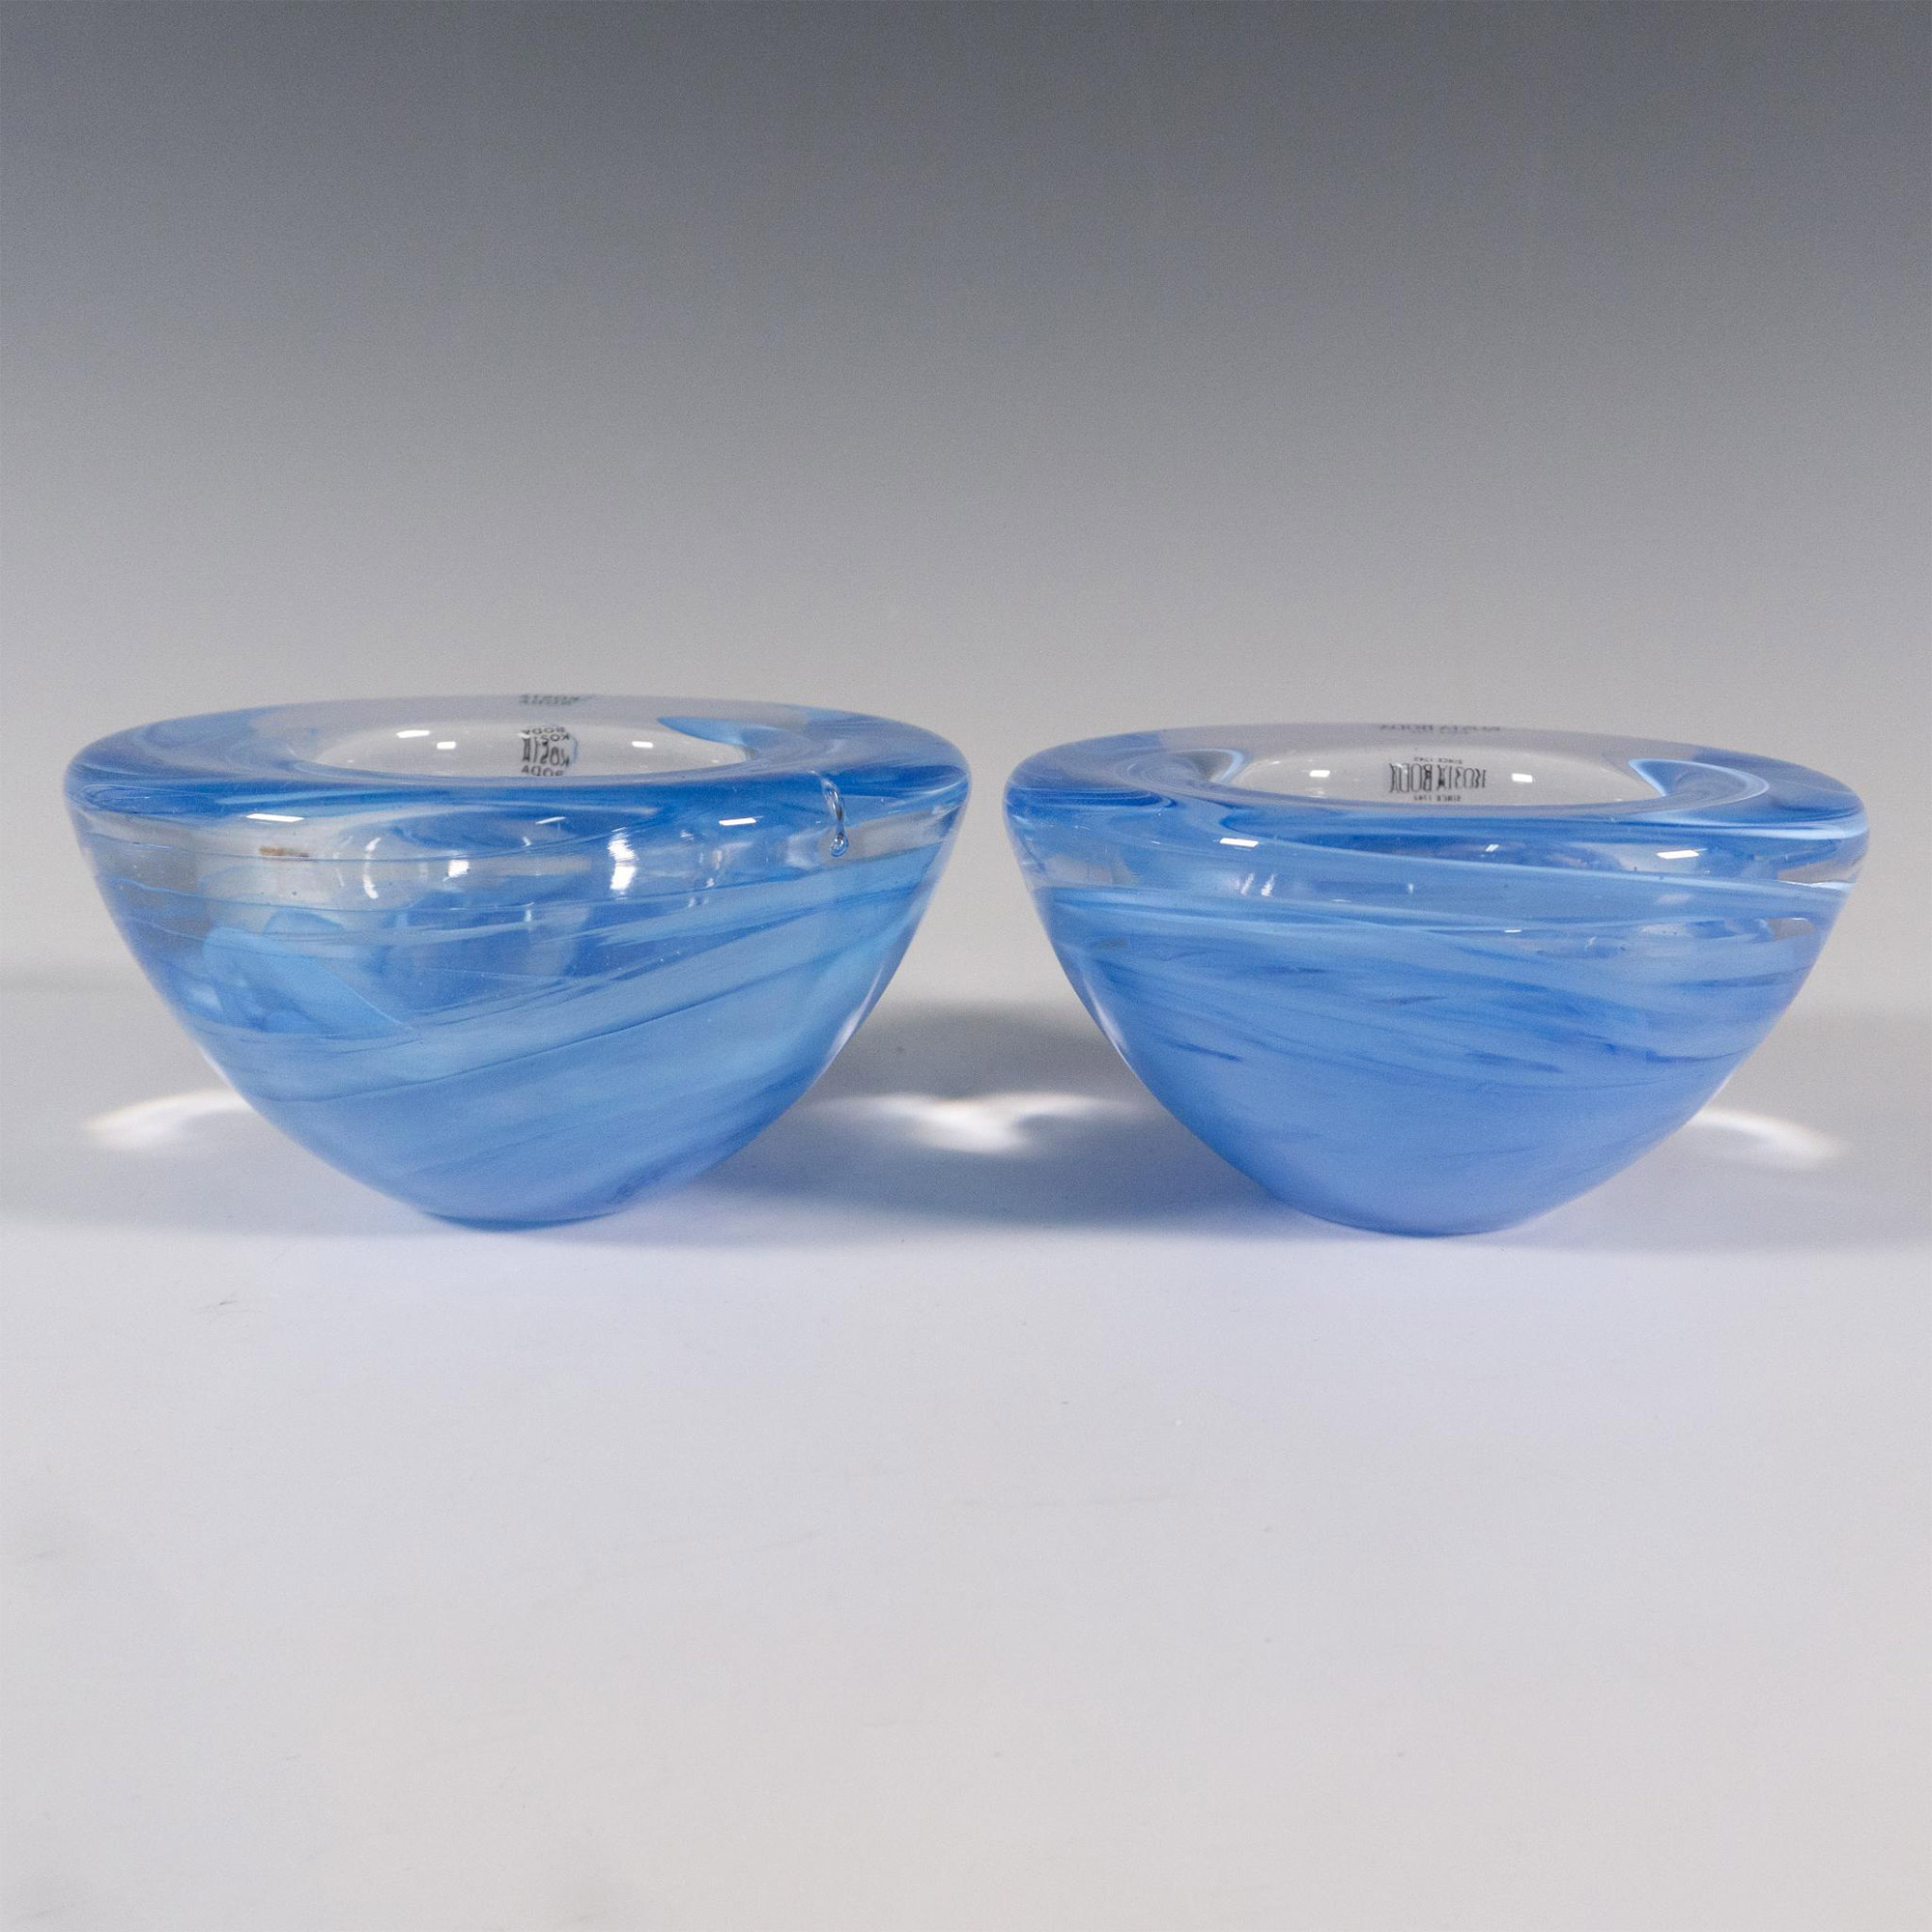 Pair of Kosta Boda by Anna Ehrner Candle Holders, Atoll - Image 2 of 4